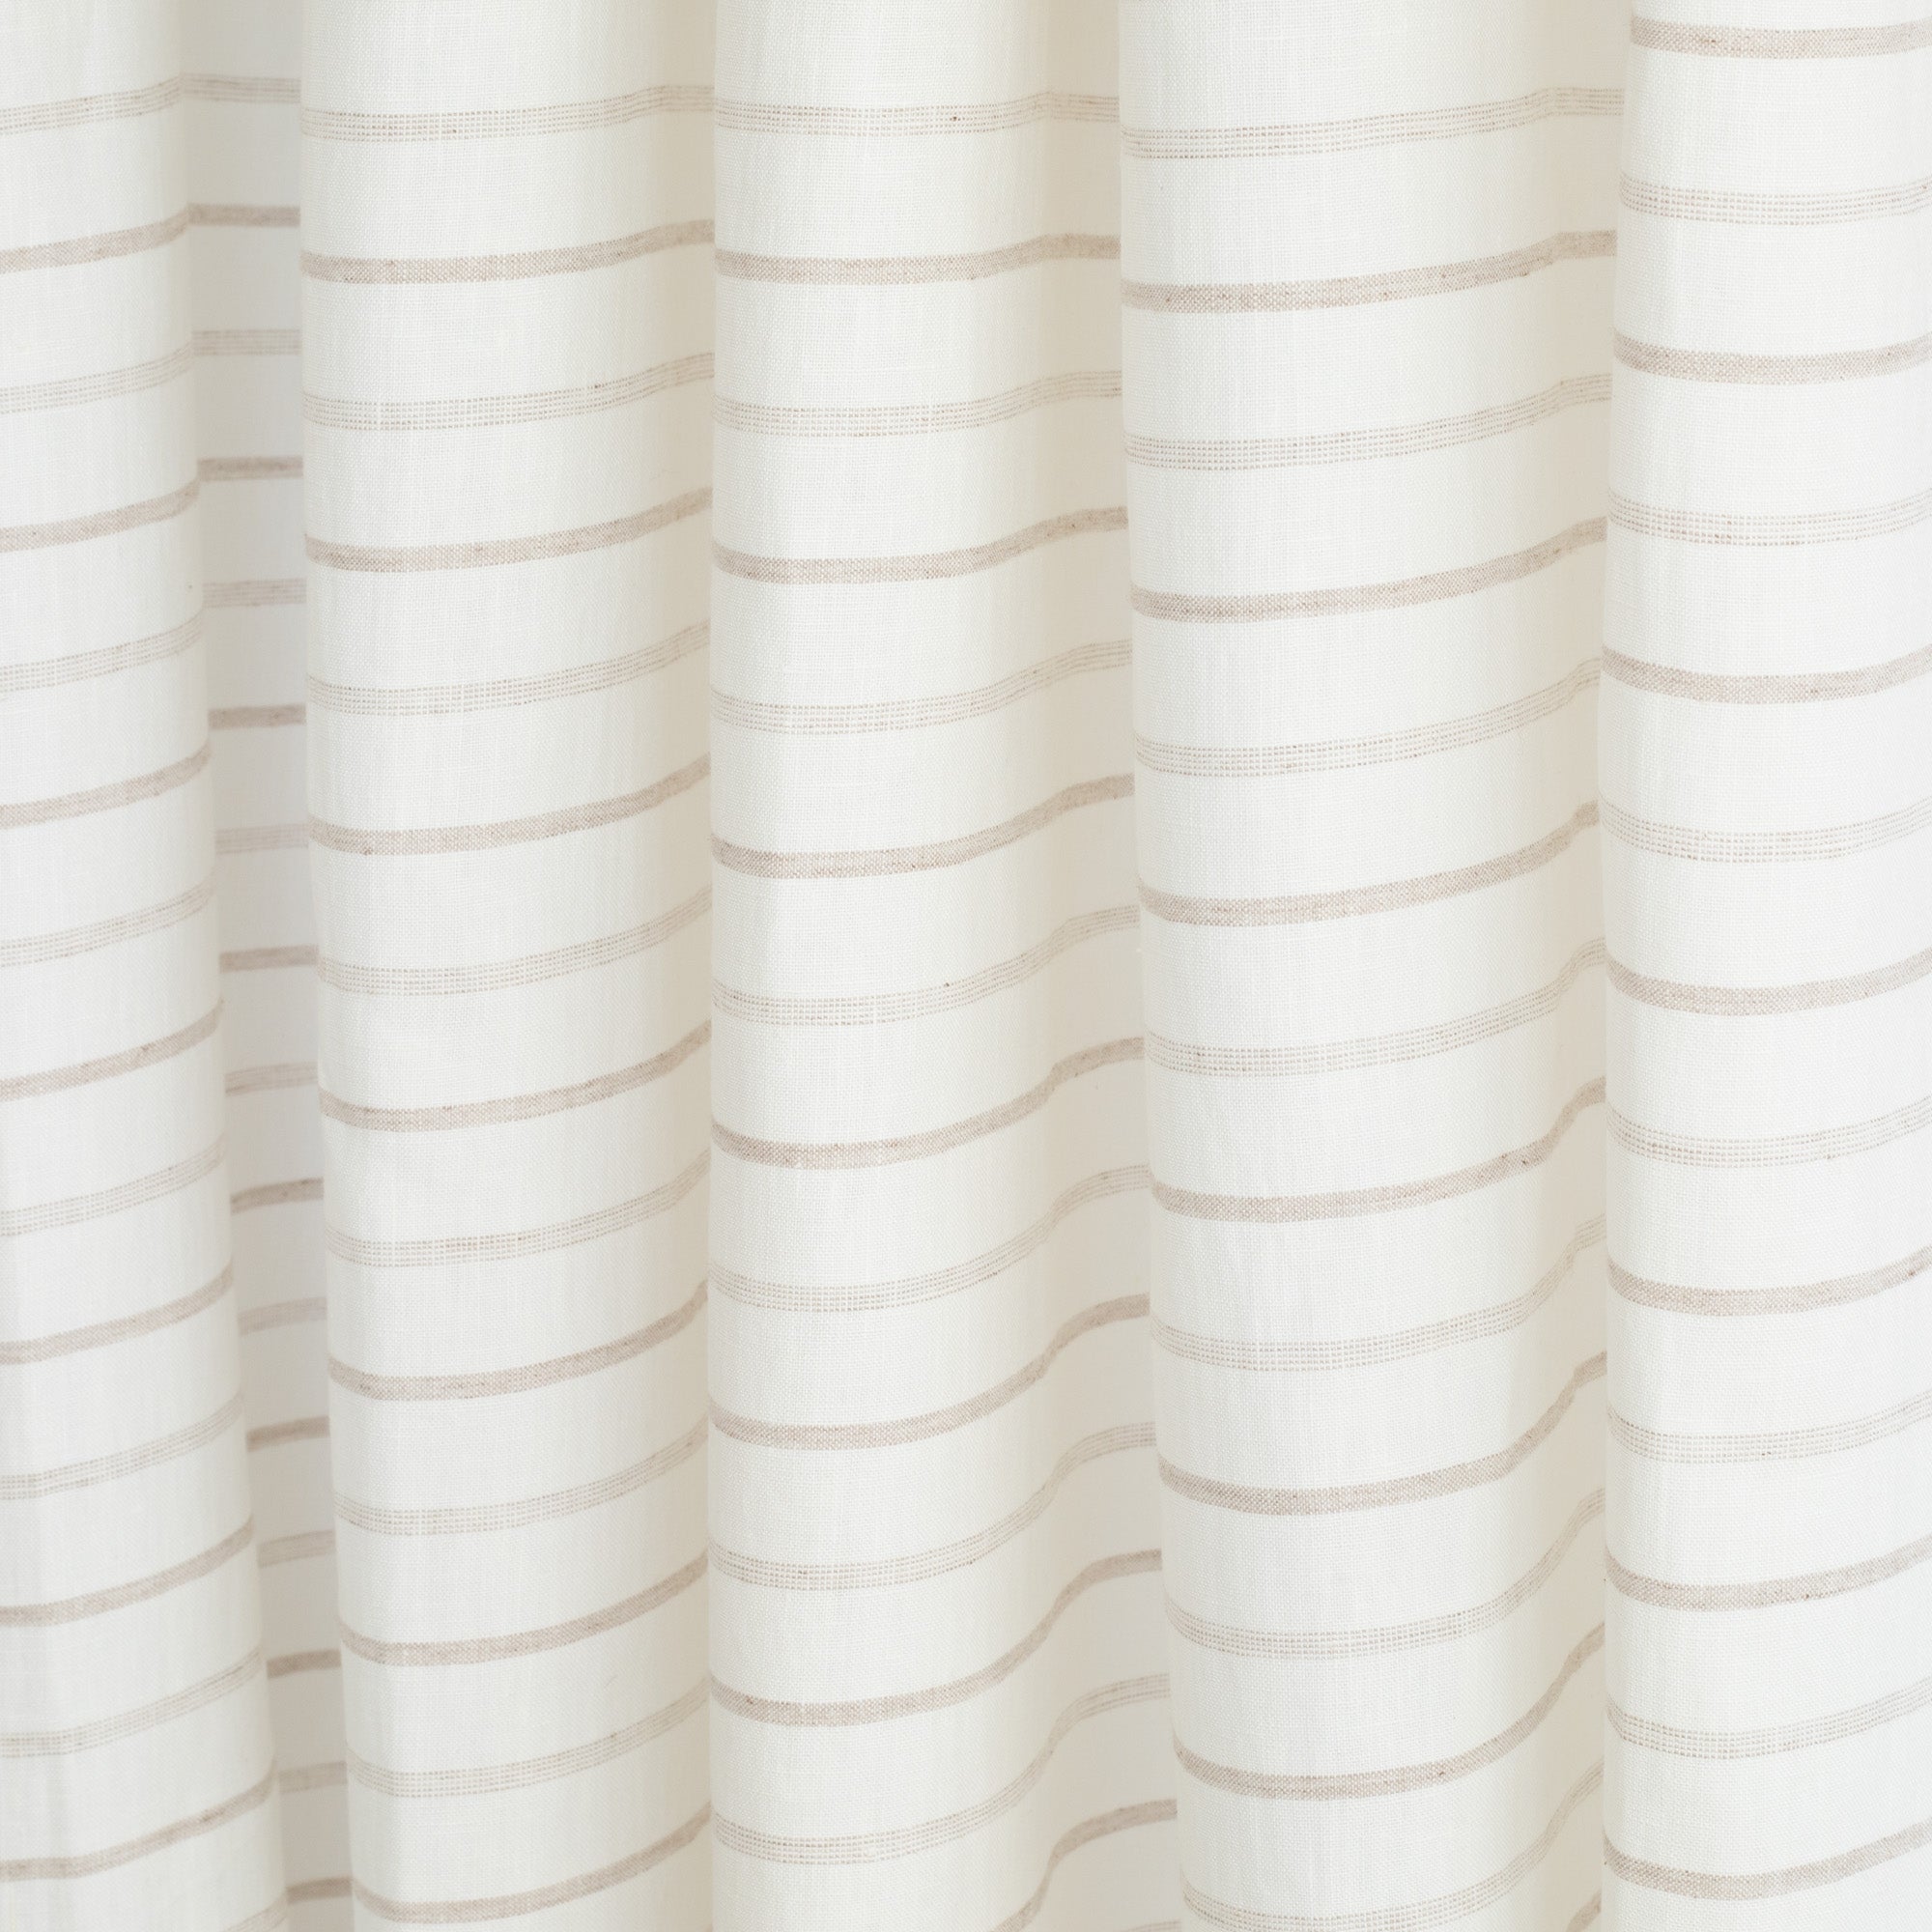 Fraser creamy-white and taupe stripe linen-blend drapery fabric : view 2